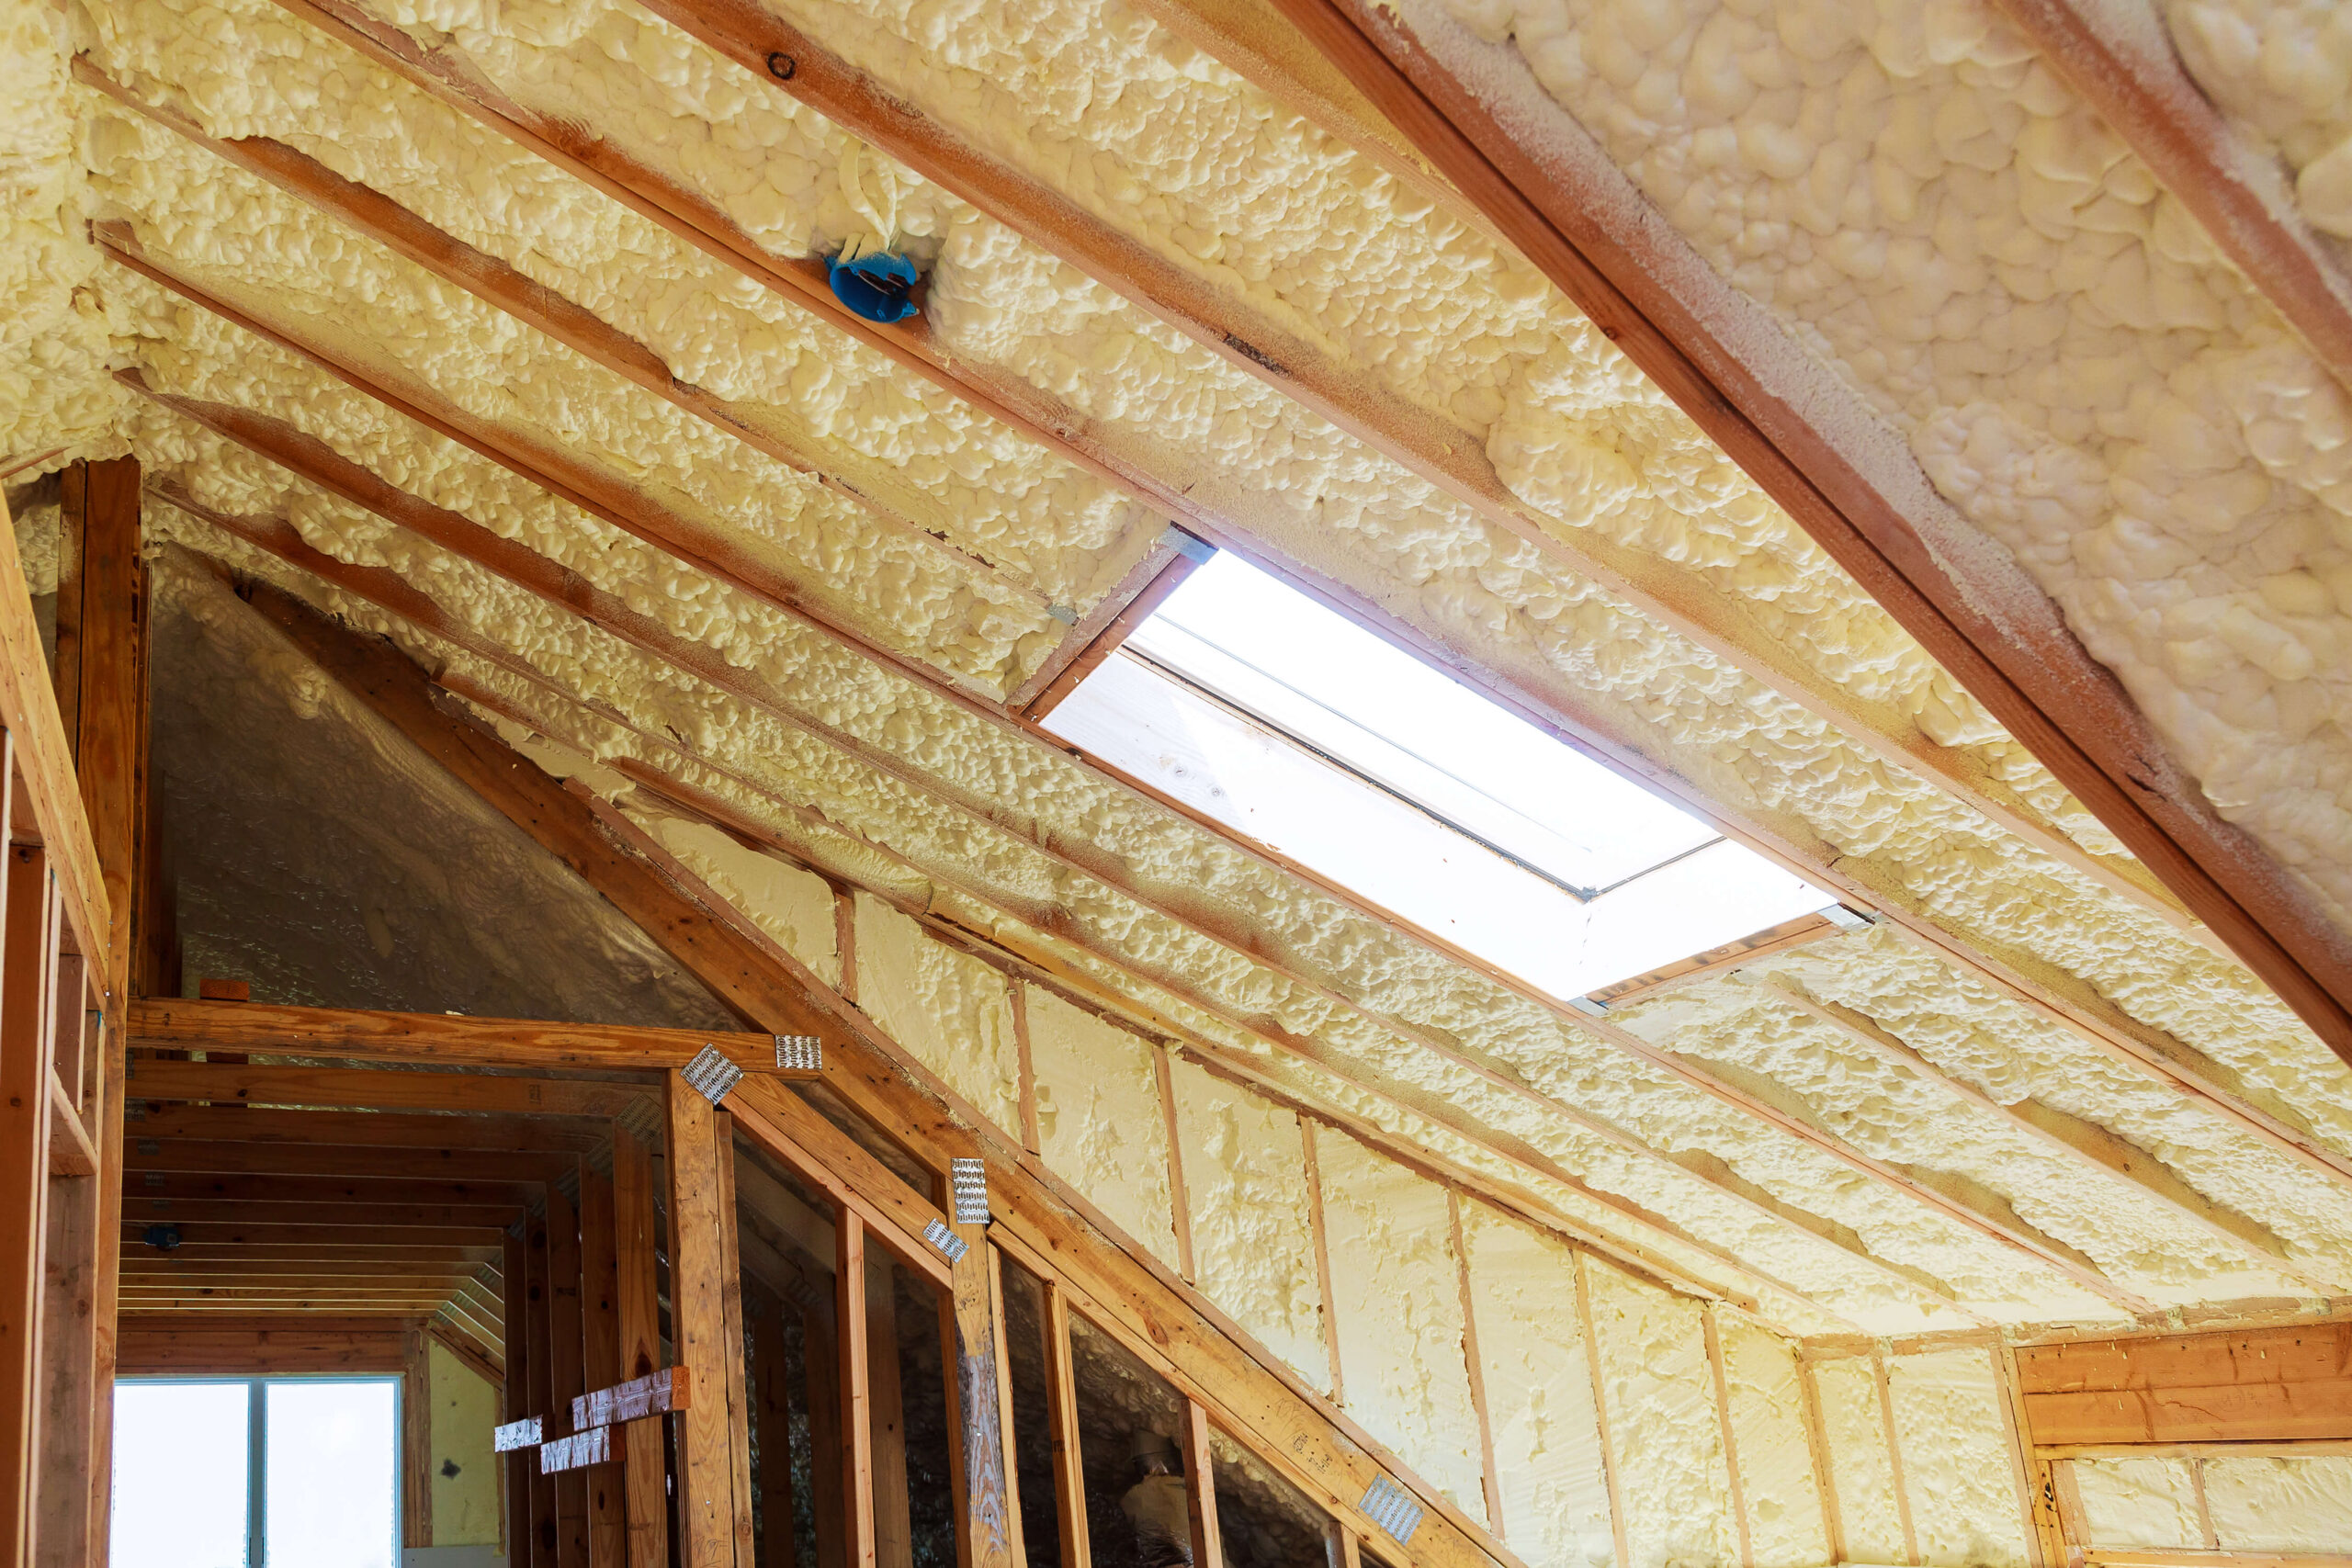 The attic of a home is being insulated with insulation.